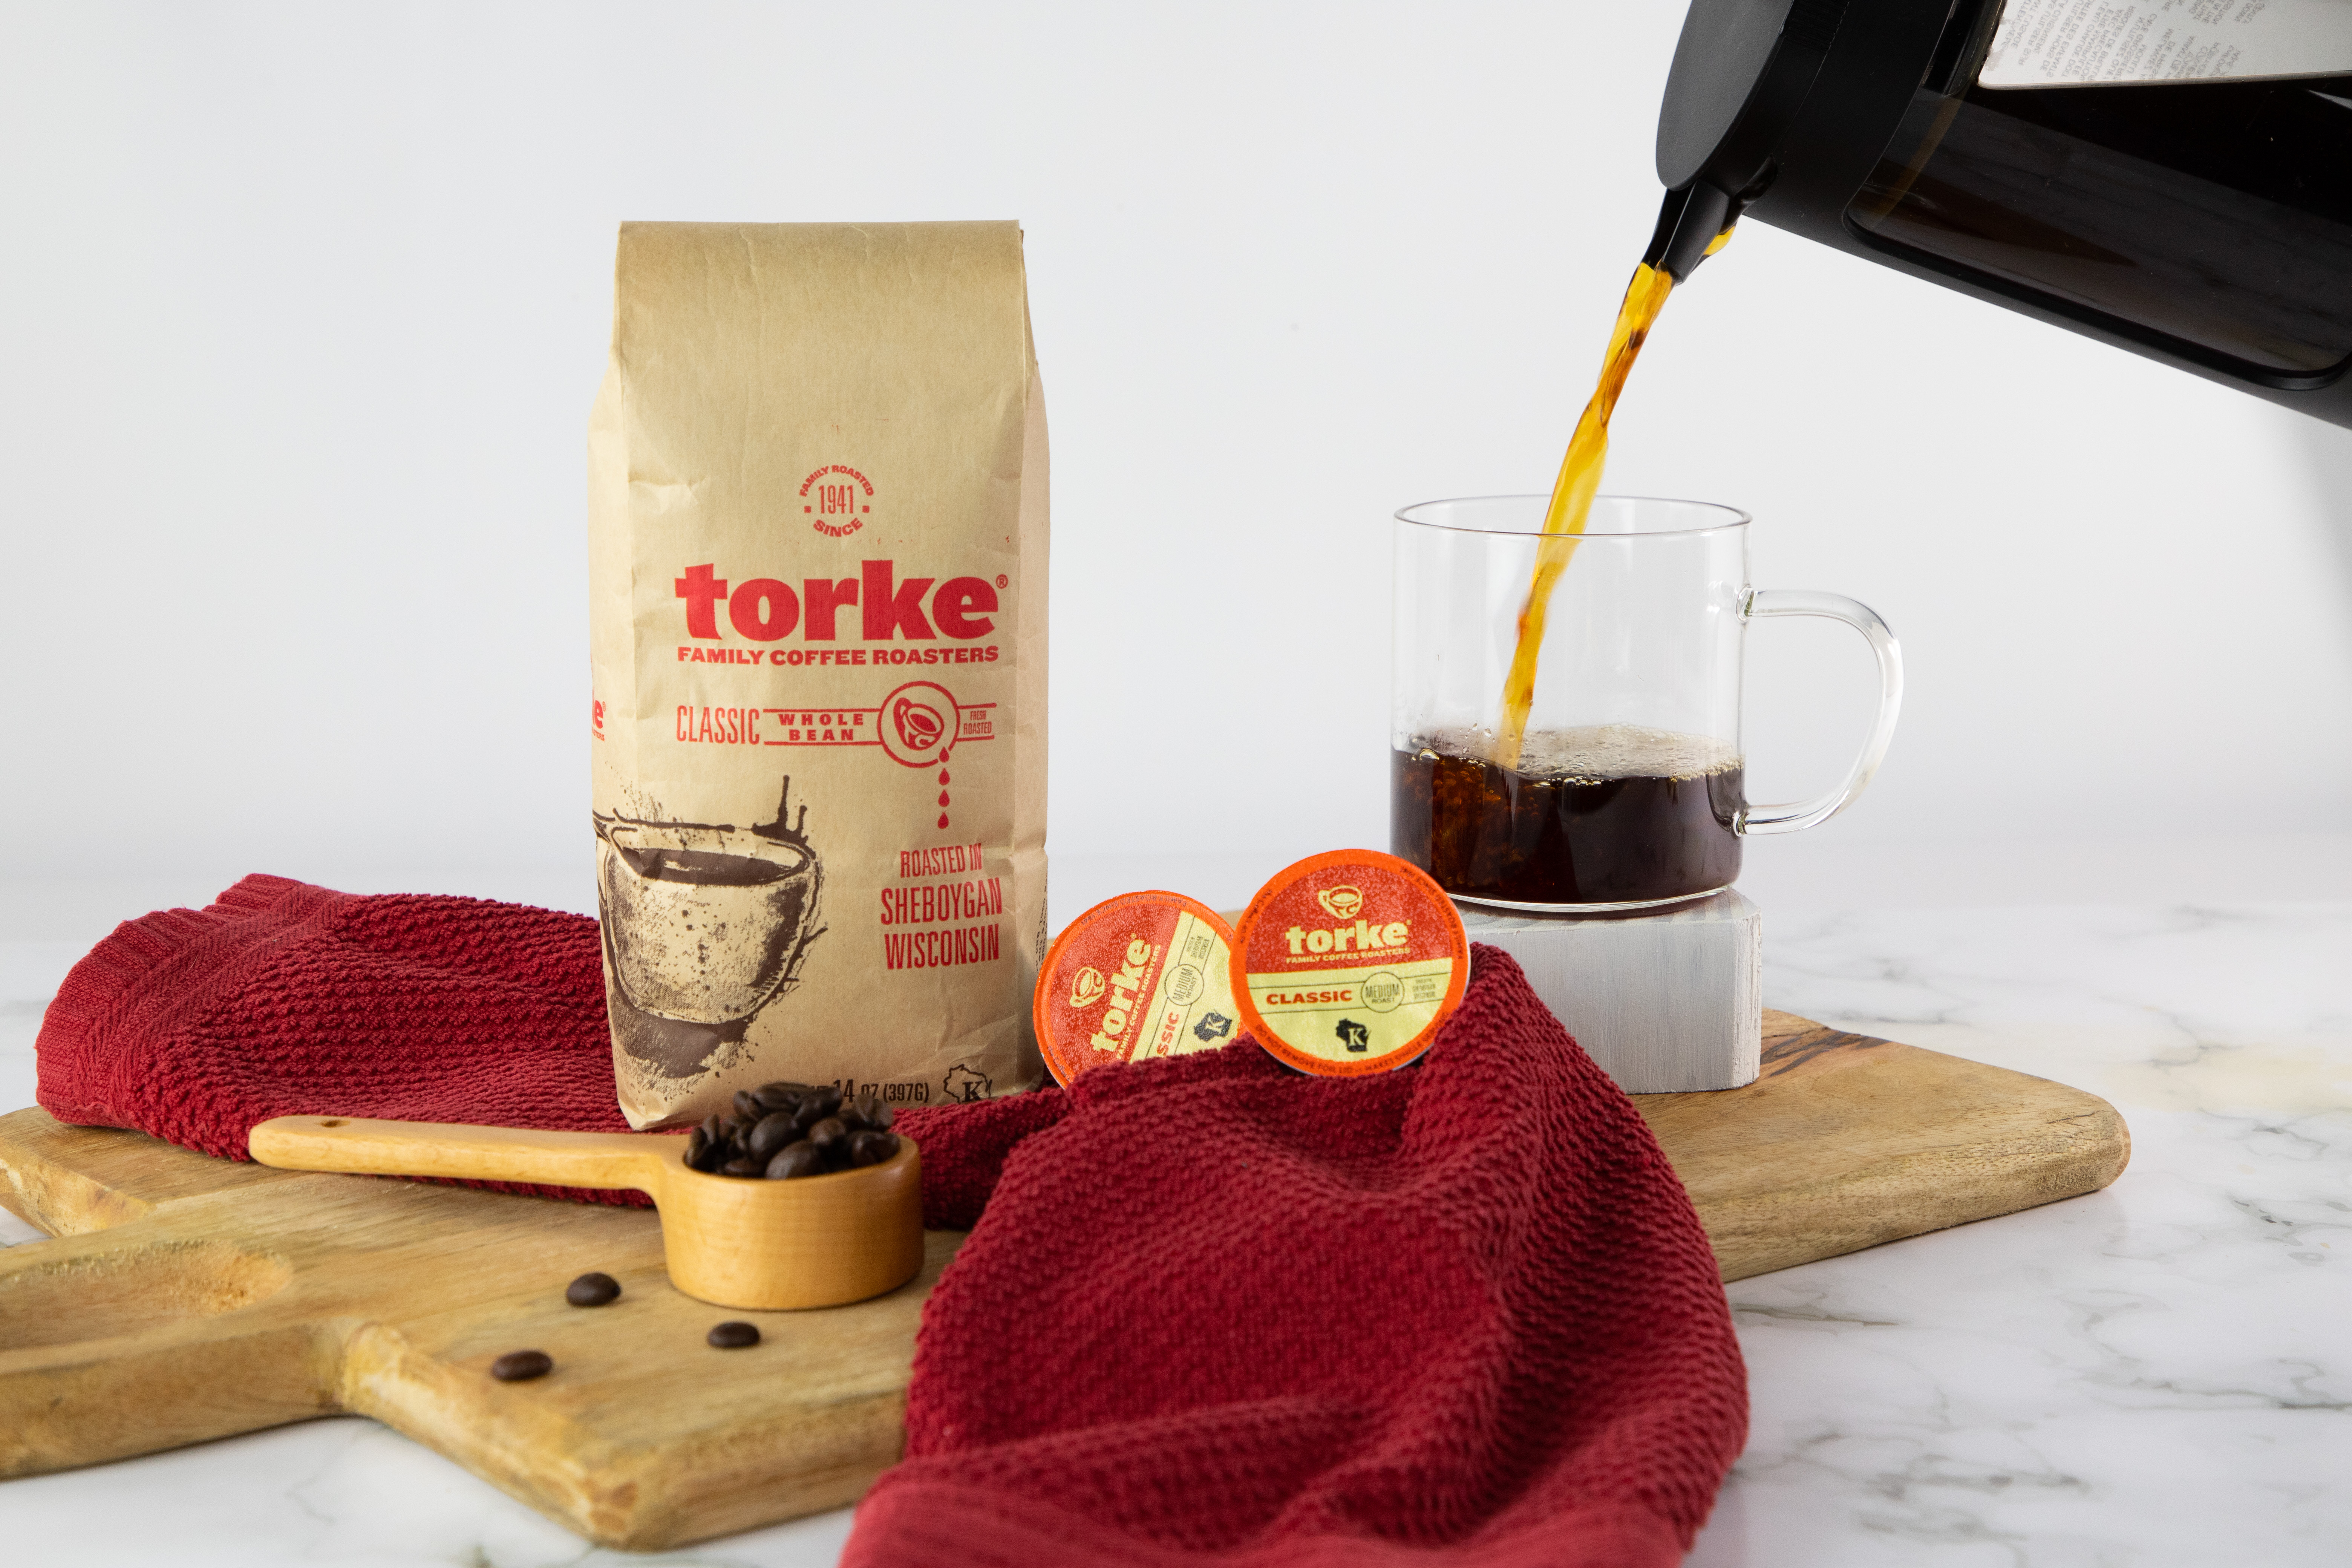 Torke coffee being poured